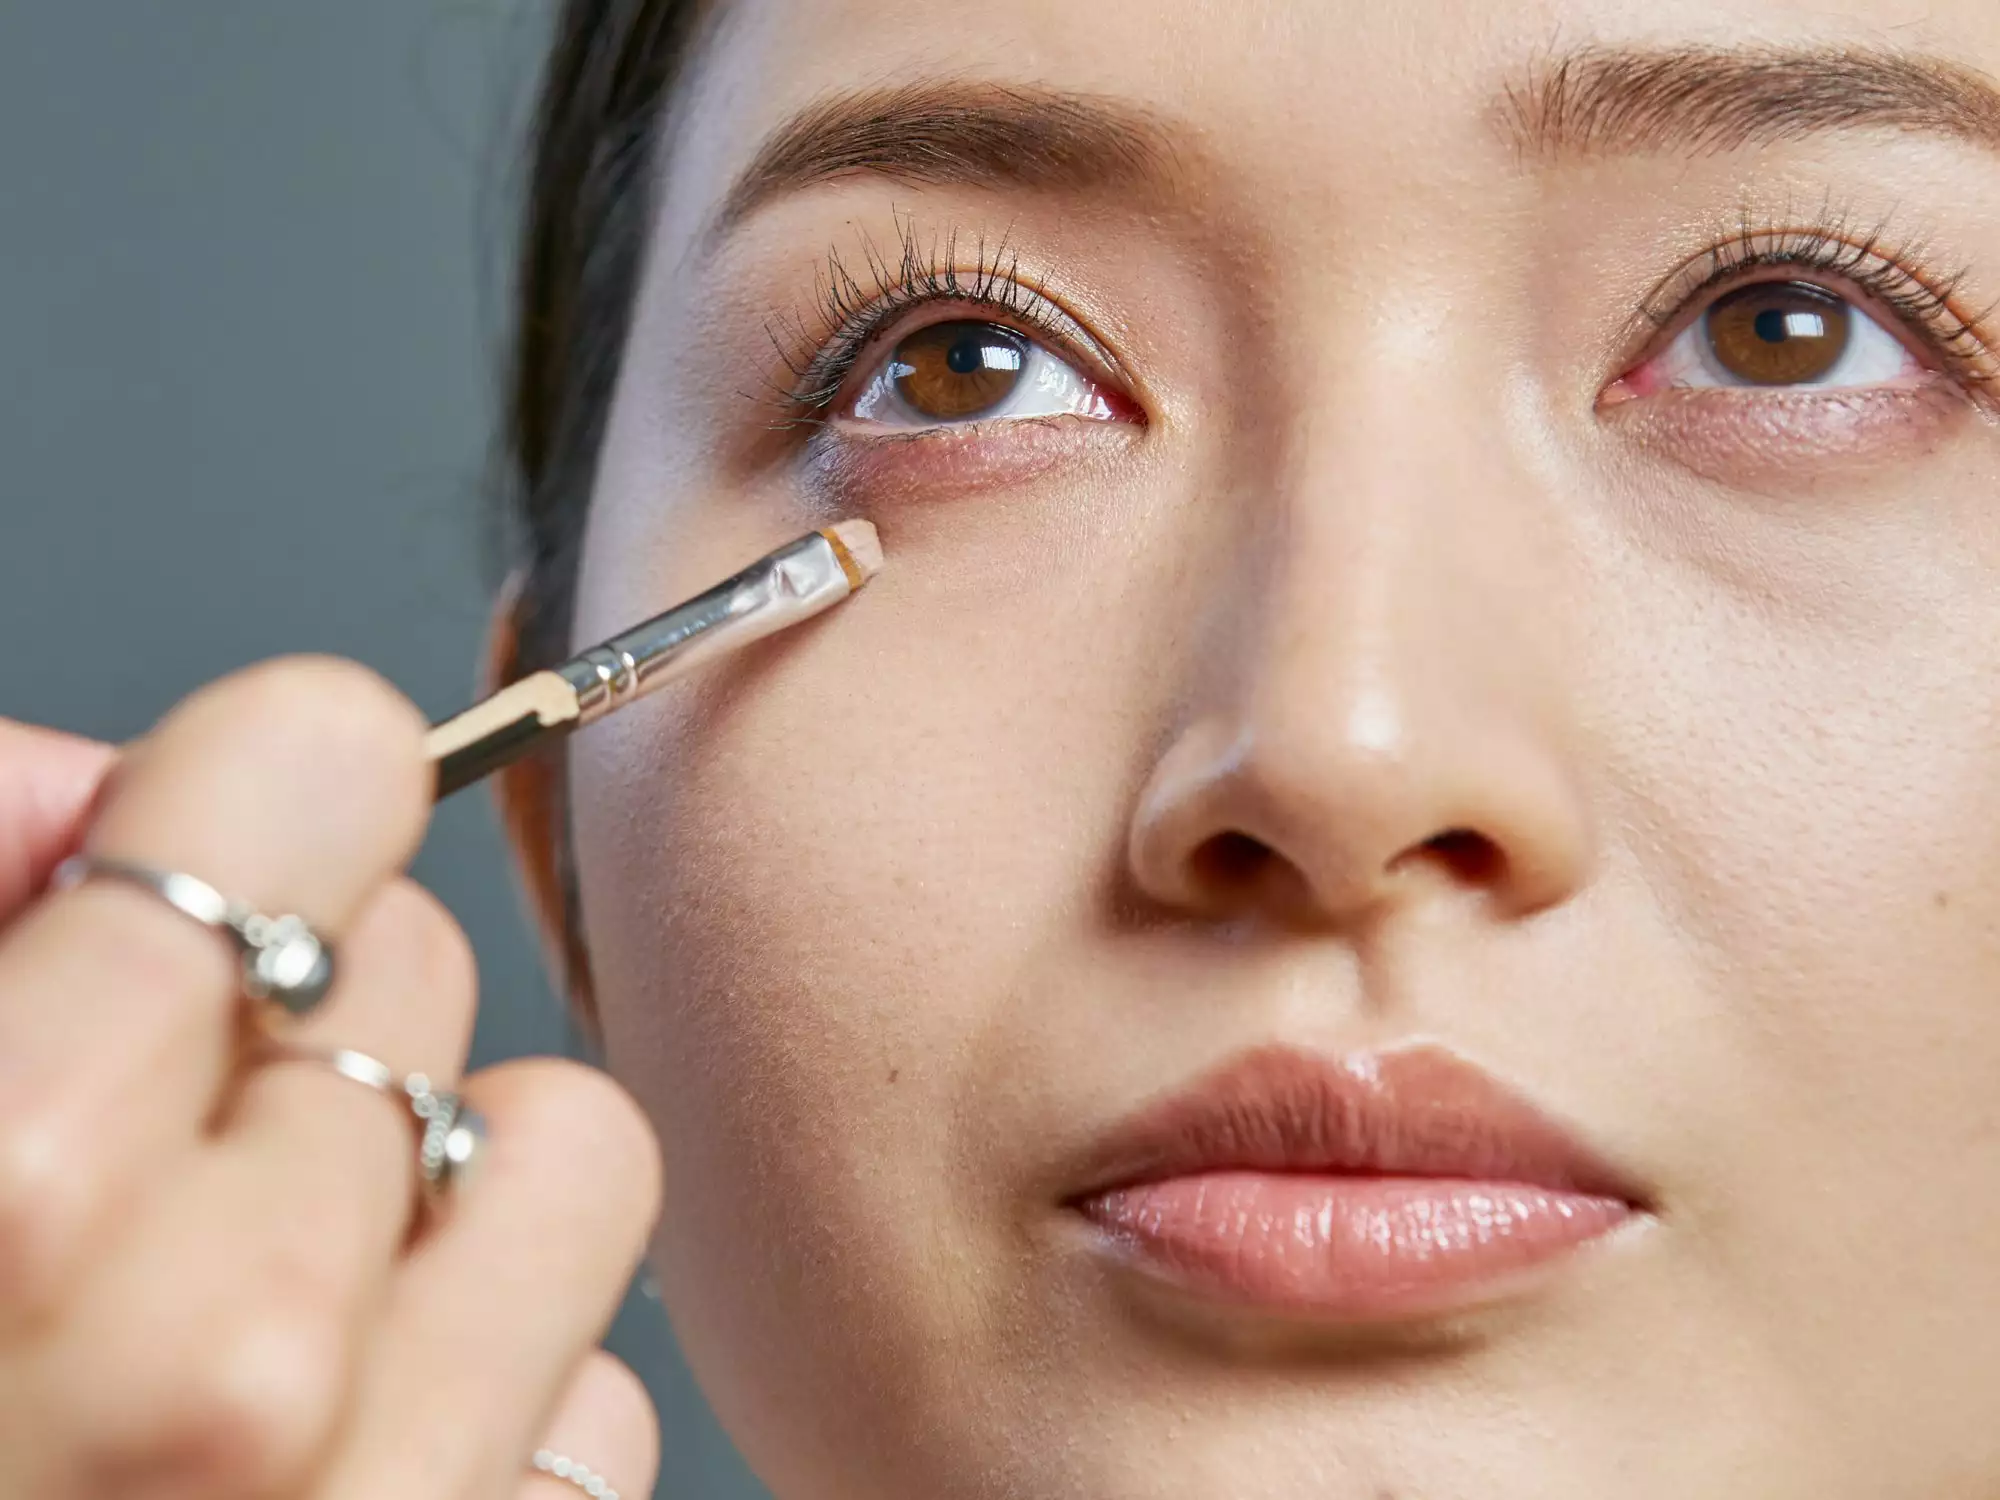 How to Use Concealer to Cover Dark Circles, Acne, and More